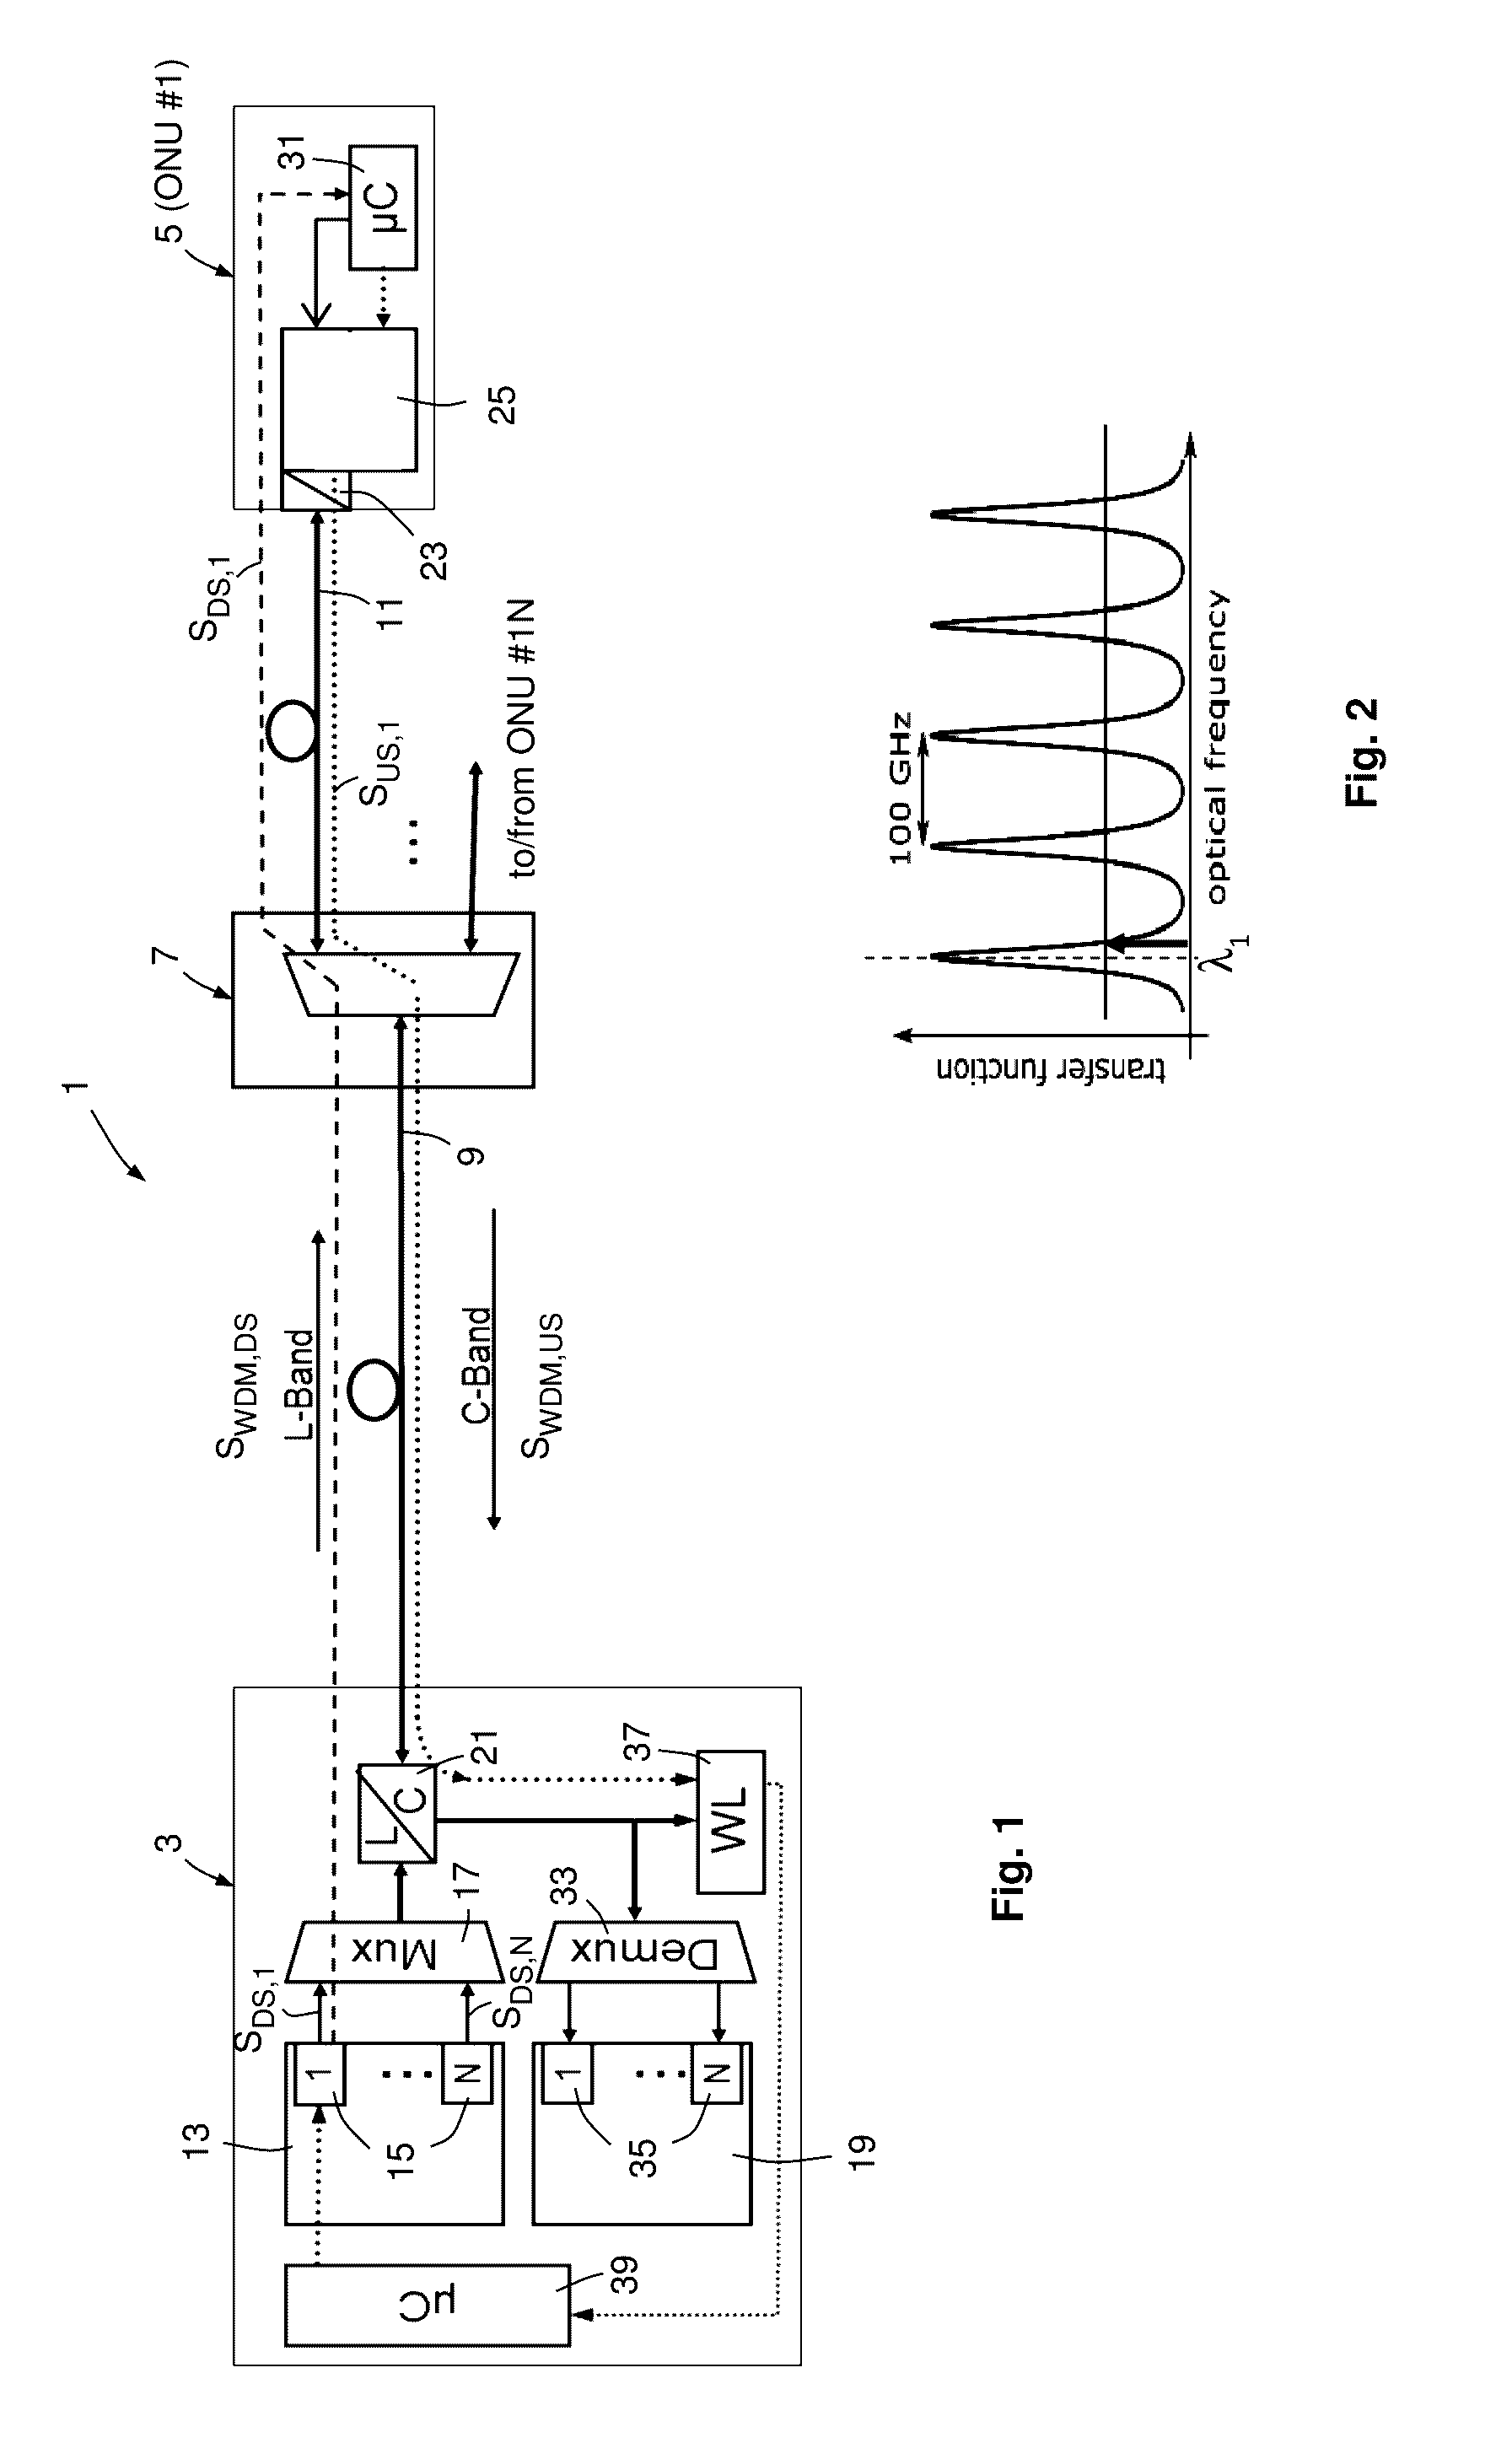 Method and Device for Creating a Control Channel in an Optical Transmission Signal and Method and Device for Extracting the Information Included Therein